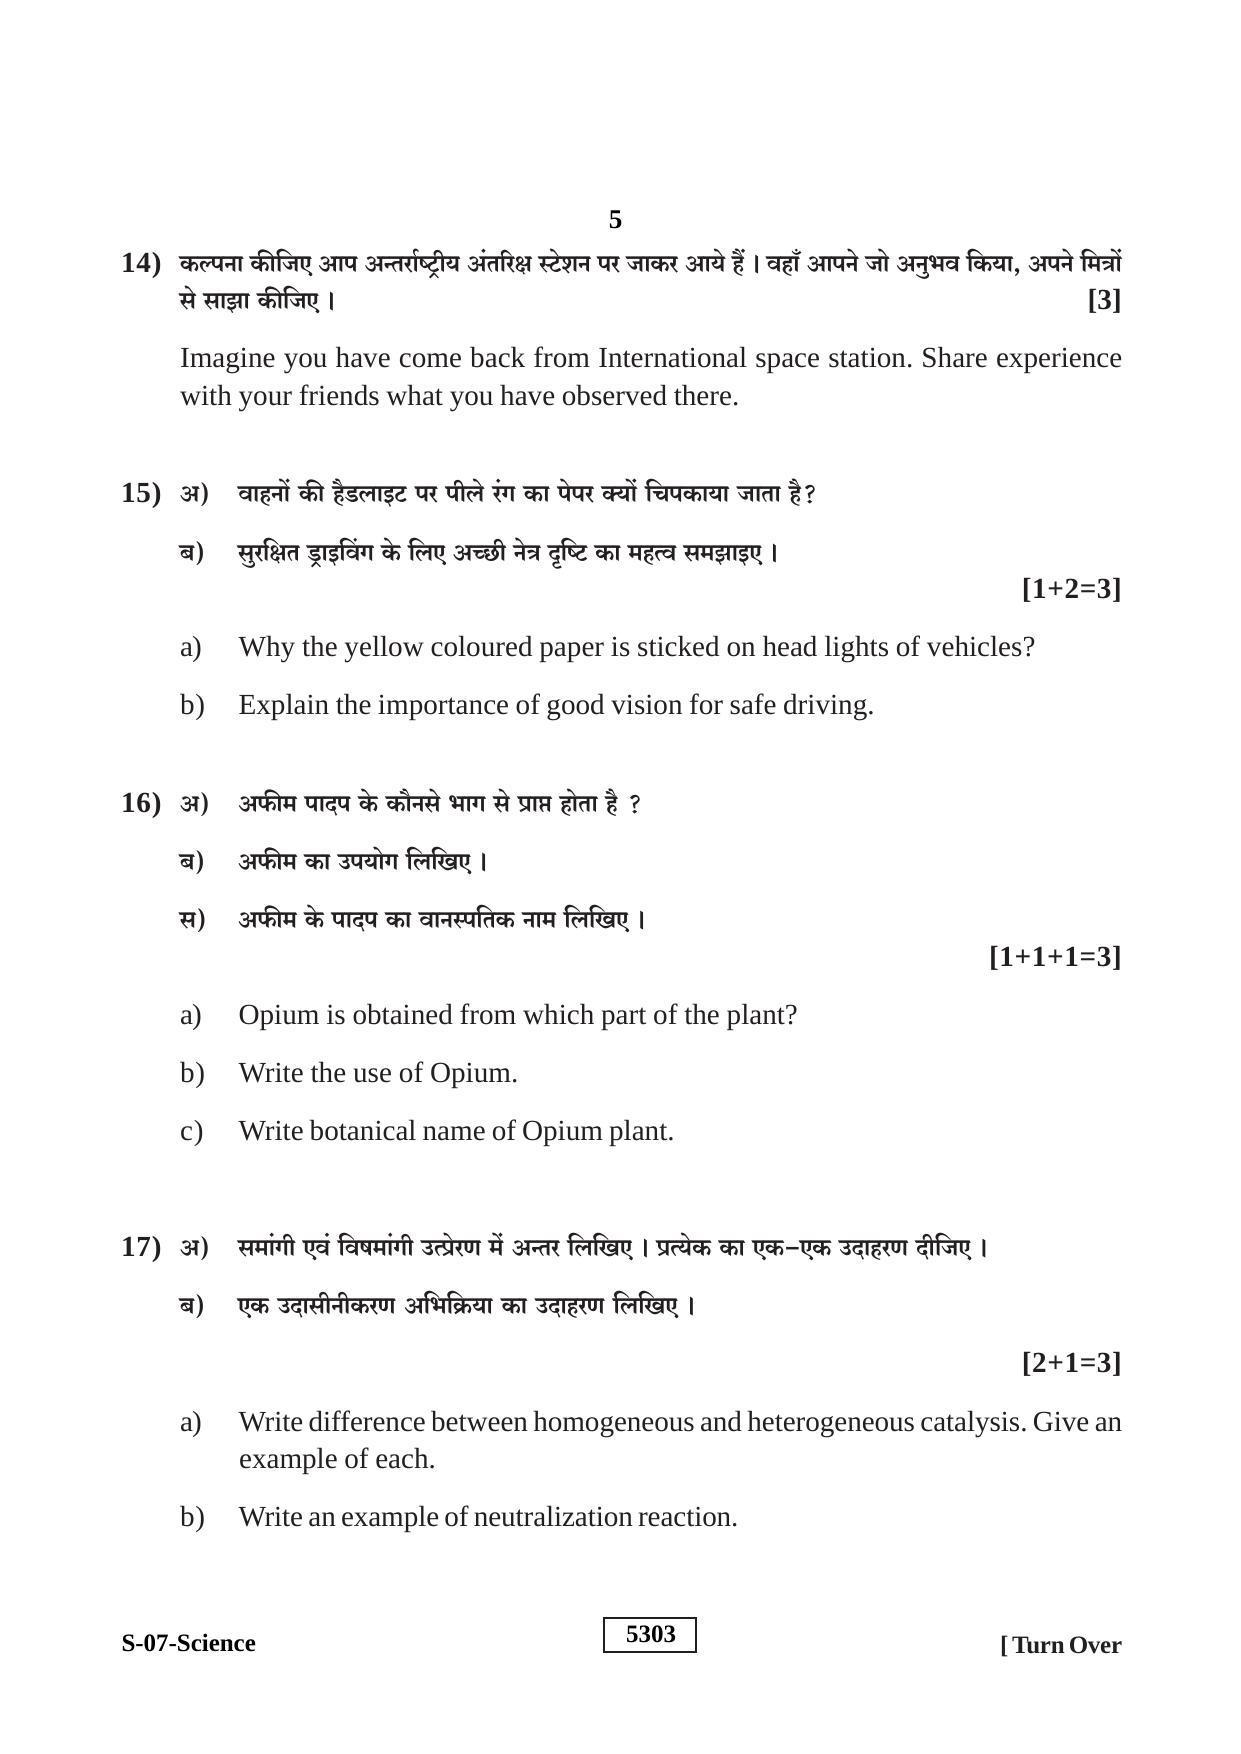 RBSE Class 10 Science 2020 Question Paper - Page 5